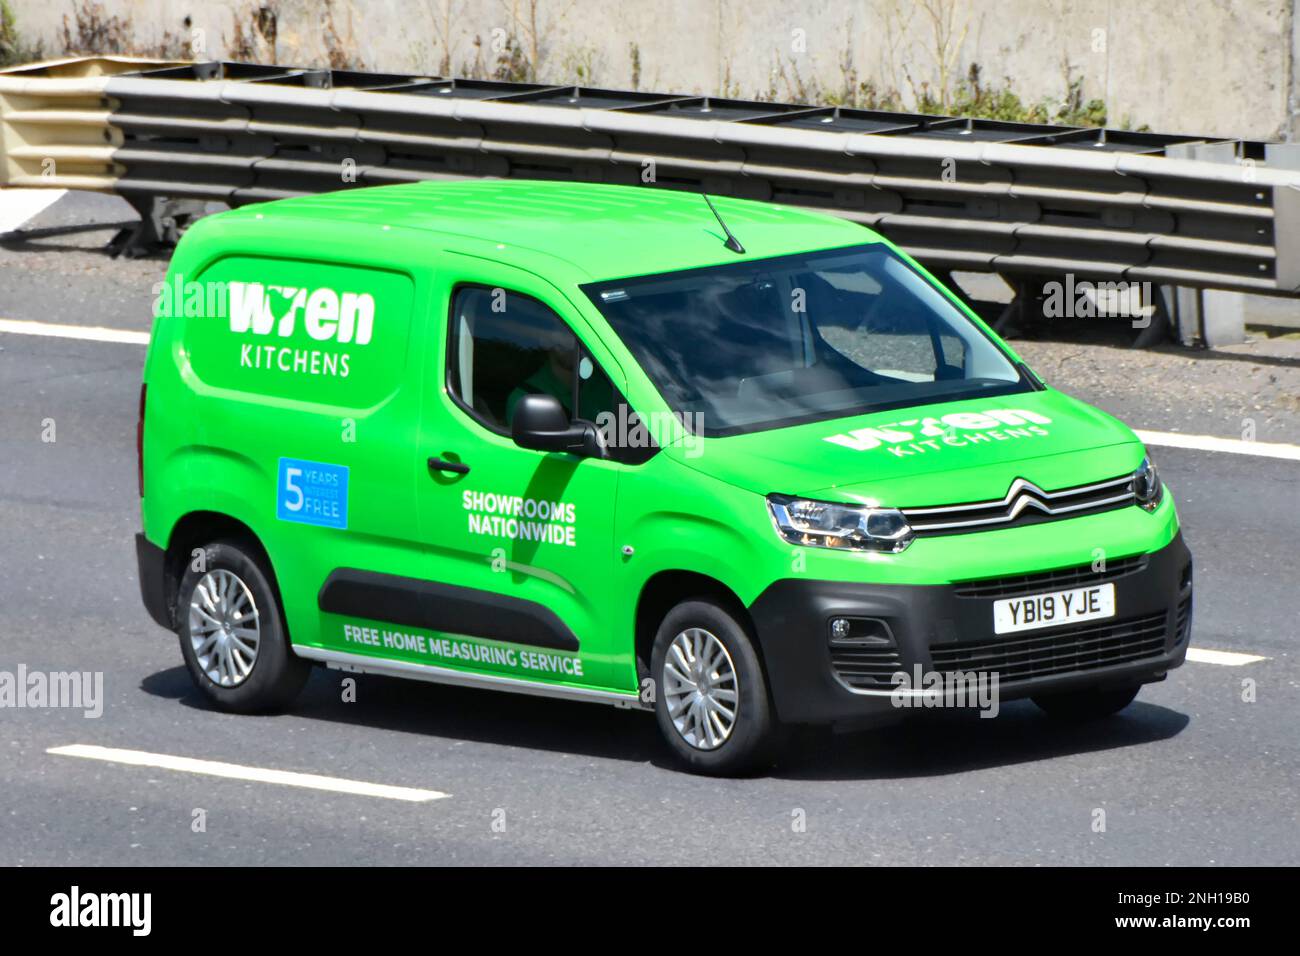 Wren Kitchens supply and fit joinery business operative inside front & side view green Citroen van driving along M25 motorway road in Essex England UK Stock Photo